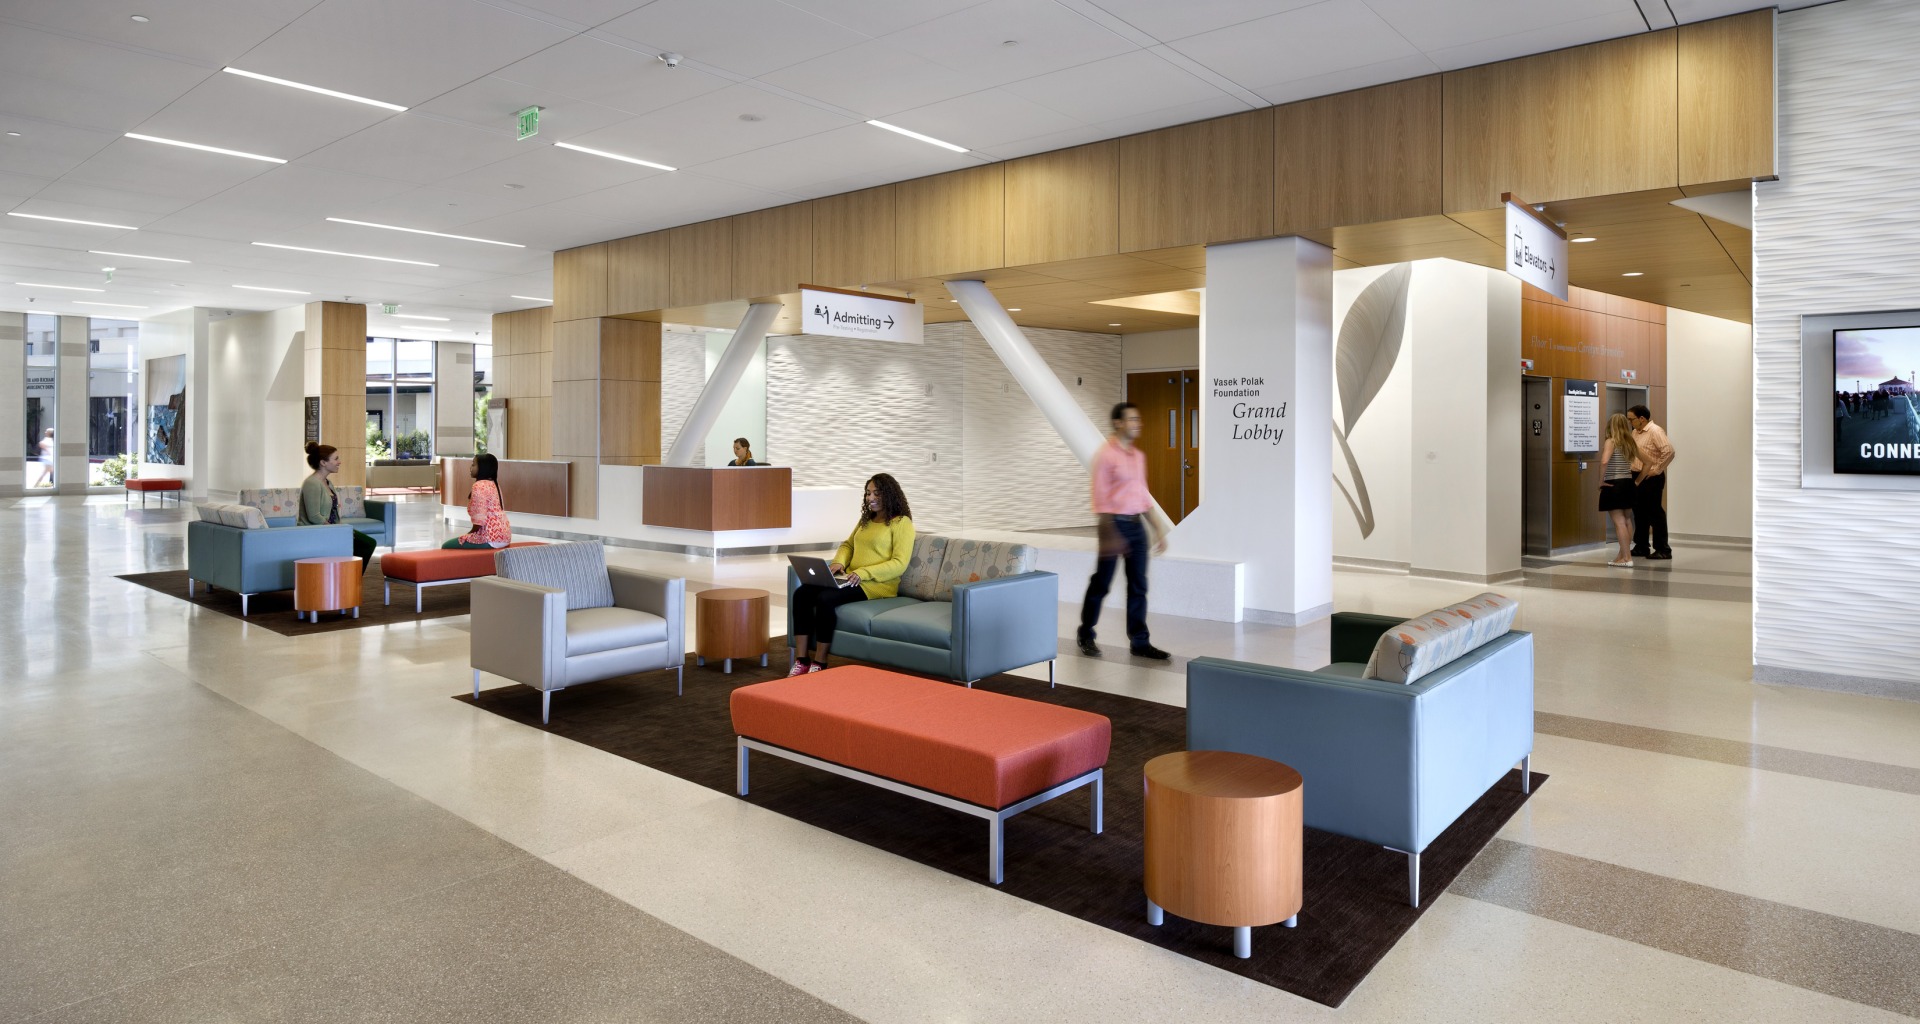 Healthcare design solutions and architectural styles for healthcare atTorrance Medical Center.